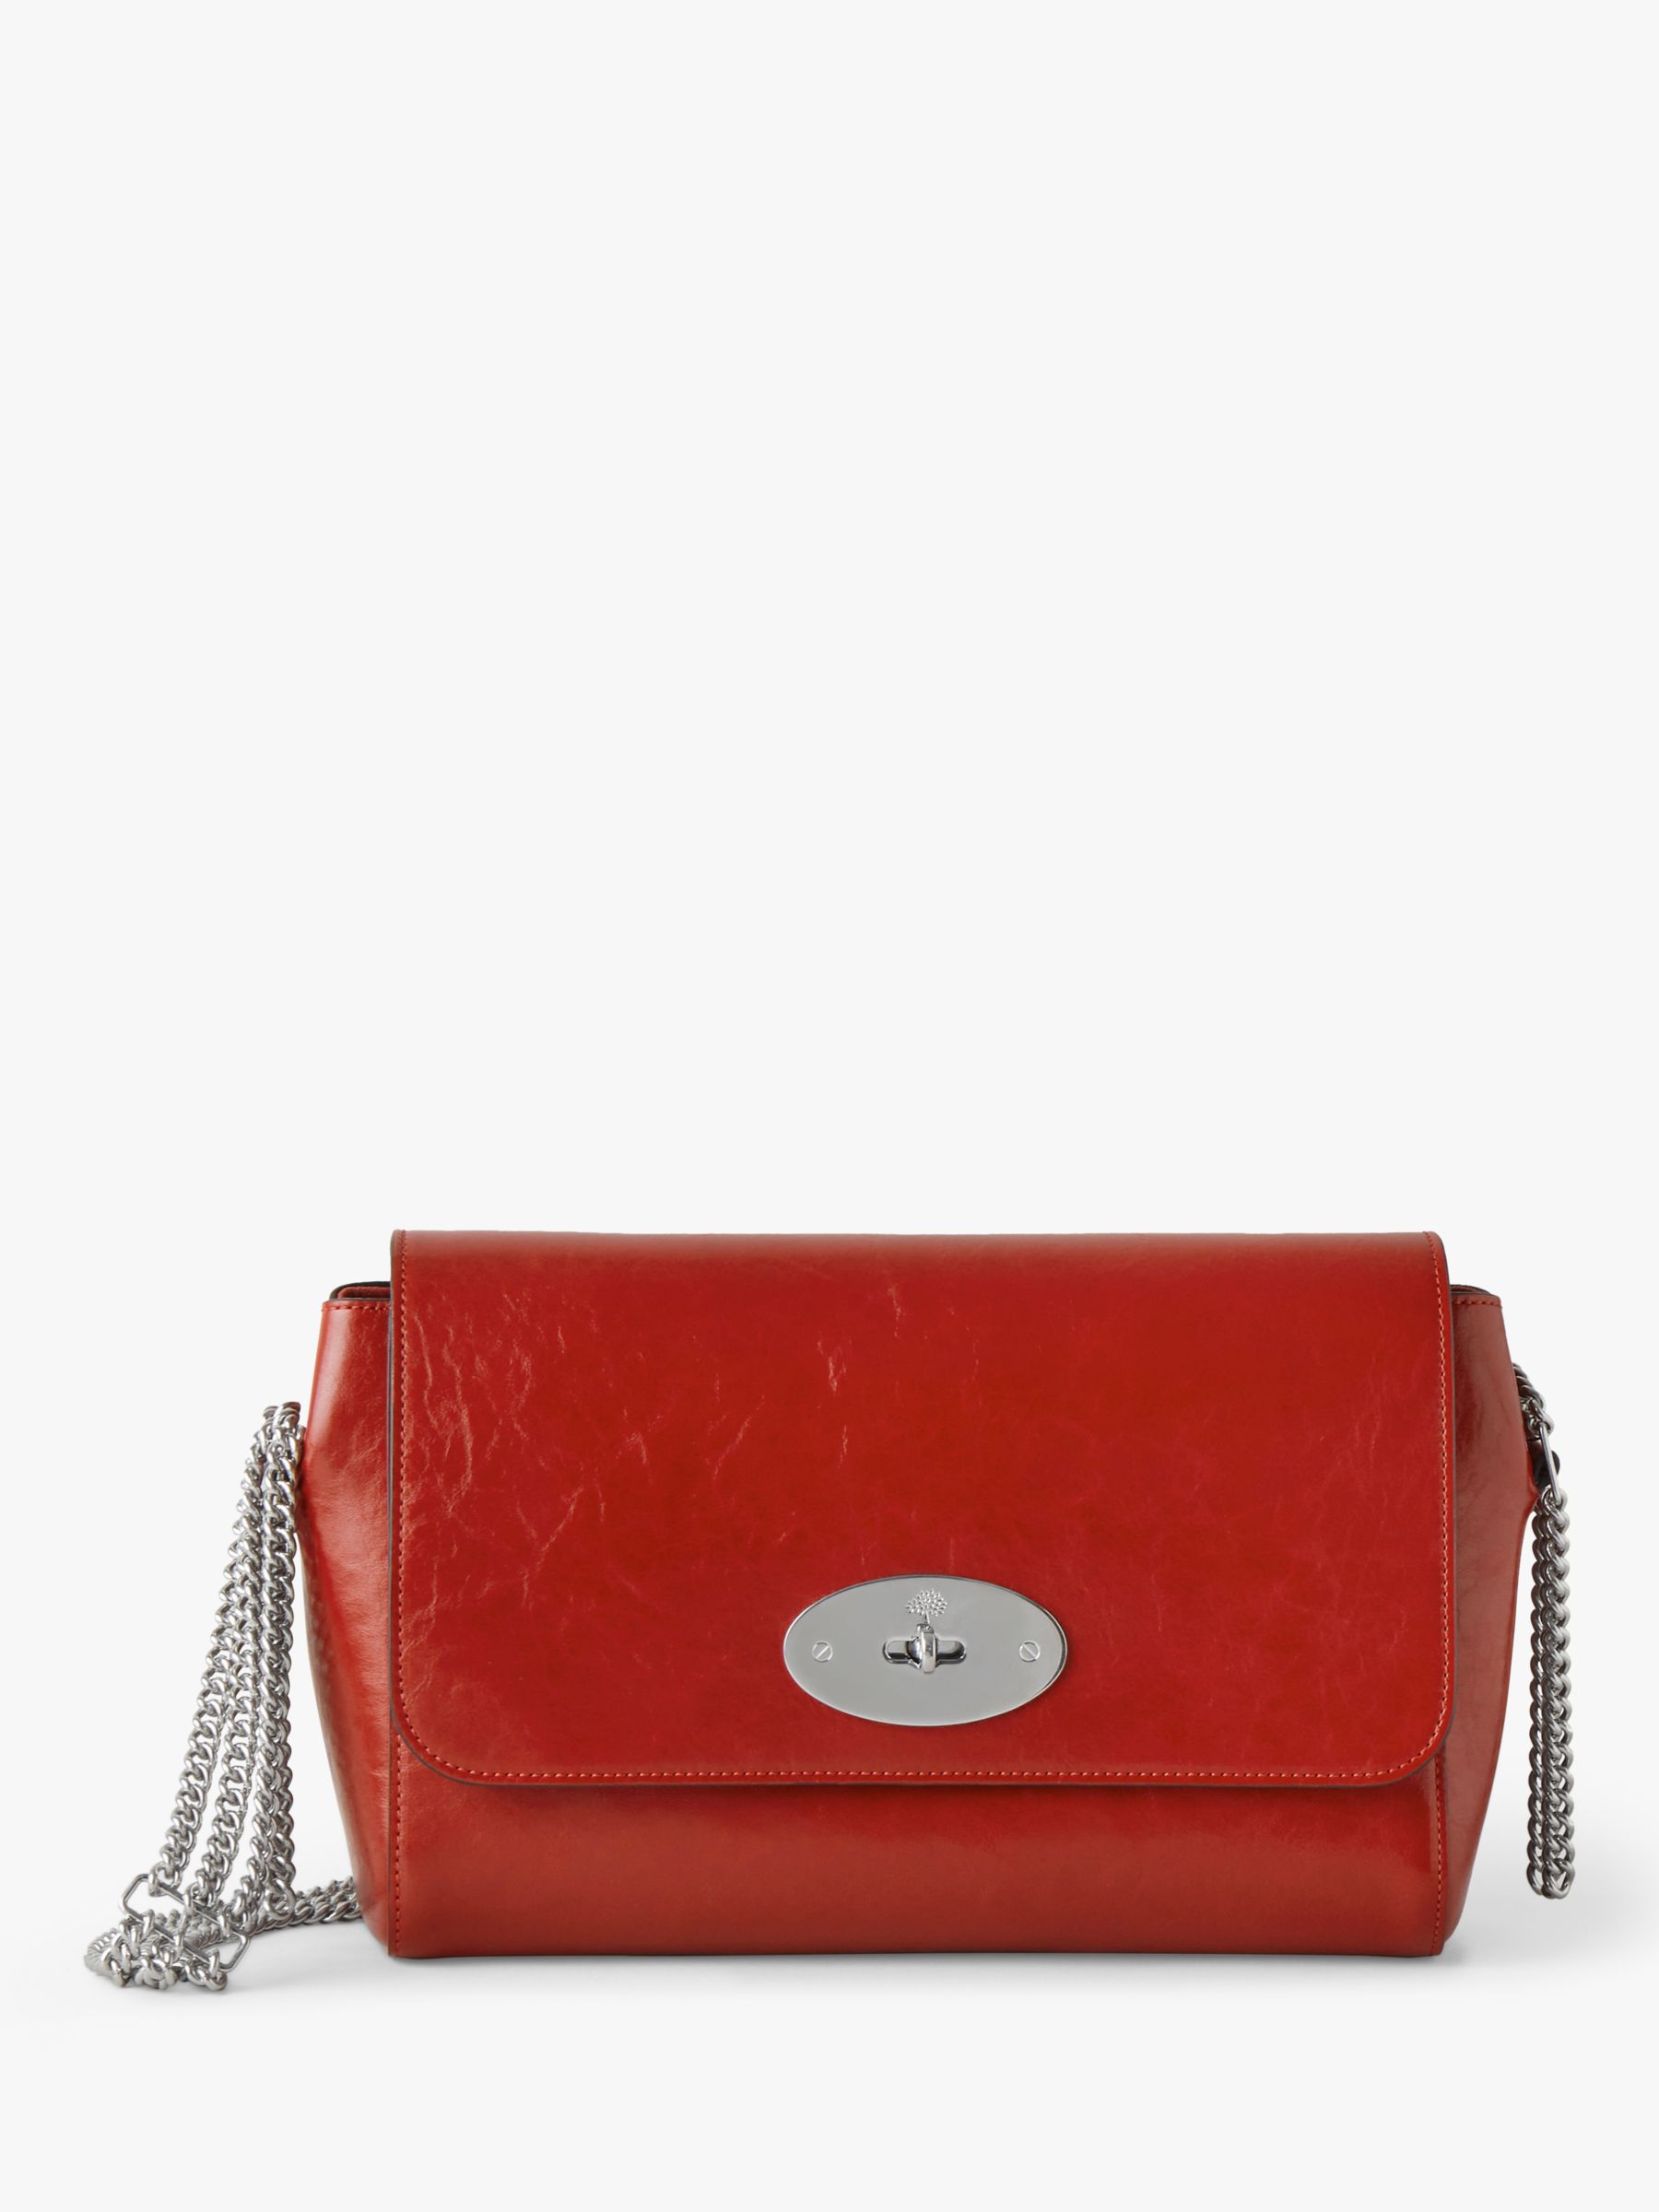 Mulberry Glossy Medium Triple Chain Lily Leather Bag, Lancaster Red